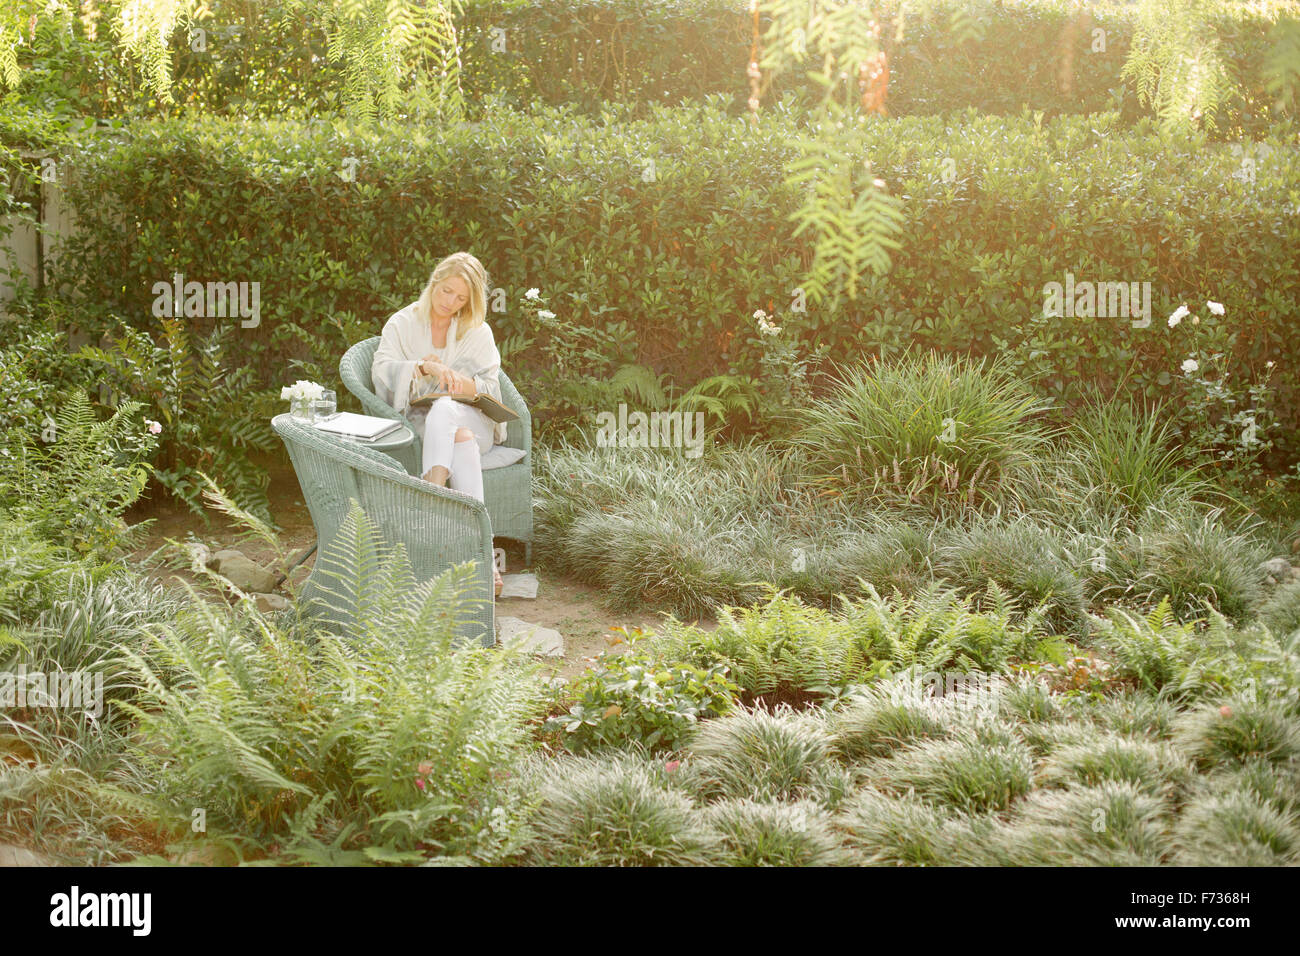 Blond woman sitting in a wicker chair in a garden, reading. Stock Photo